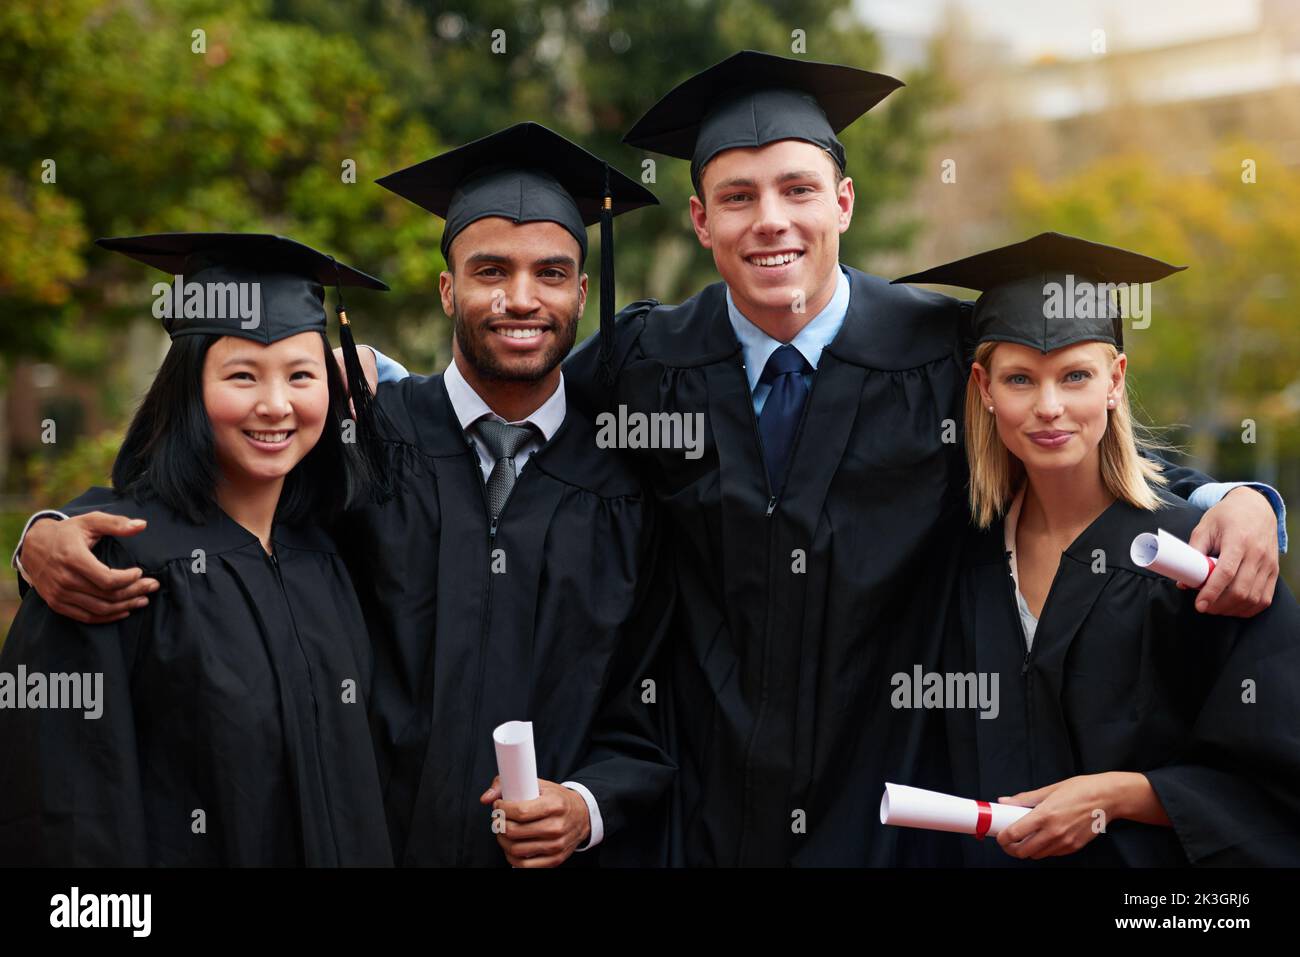 Difficult roads often lead to beautiful destinations. A group of college graduates standing in cap and gown and holding their diplomas. Stock Photo